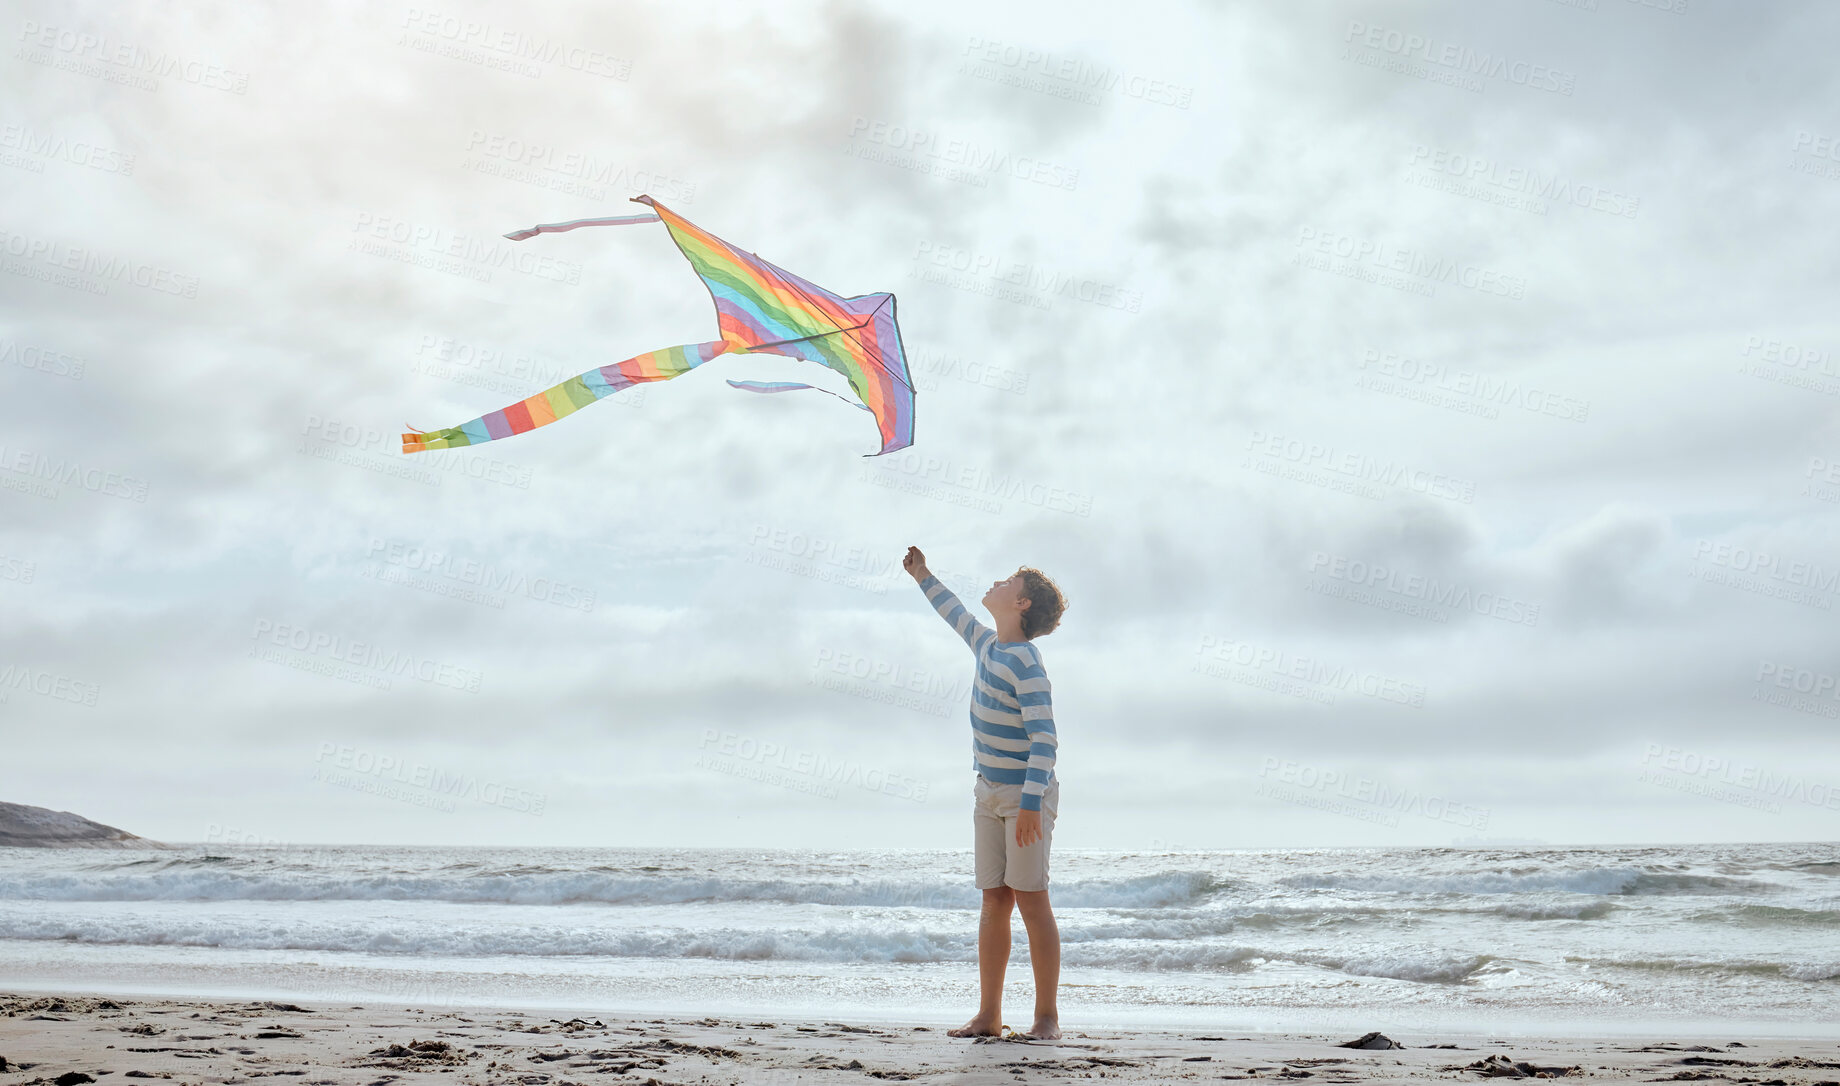 Buy stock photo One little caucasian boy flying a colourful rainbow kite in the wind at the beach. Playful young child having fun outdoors. The innocence of childhood